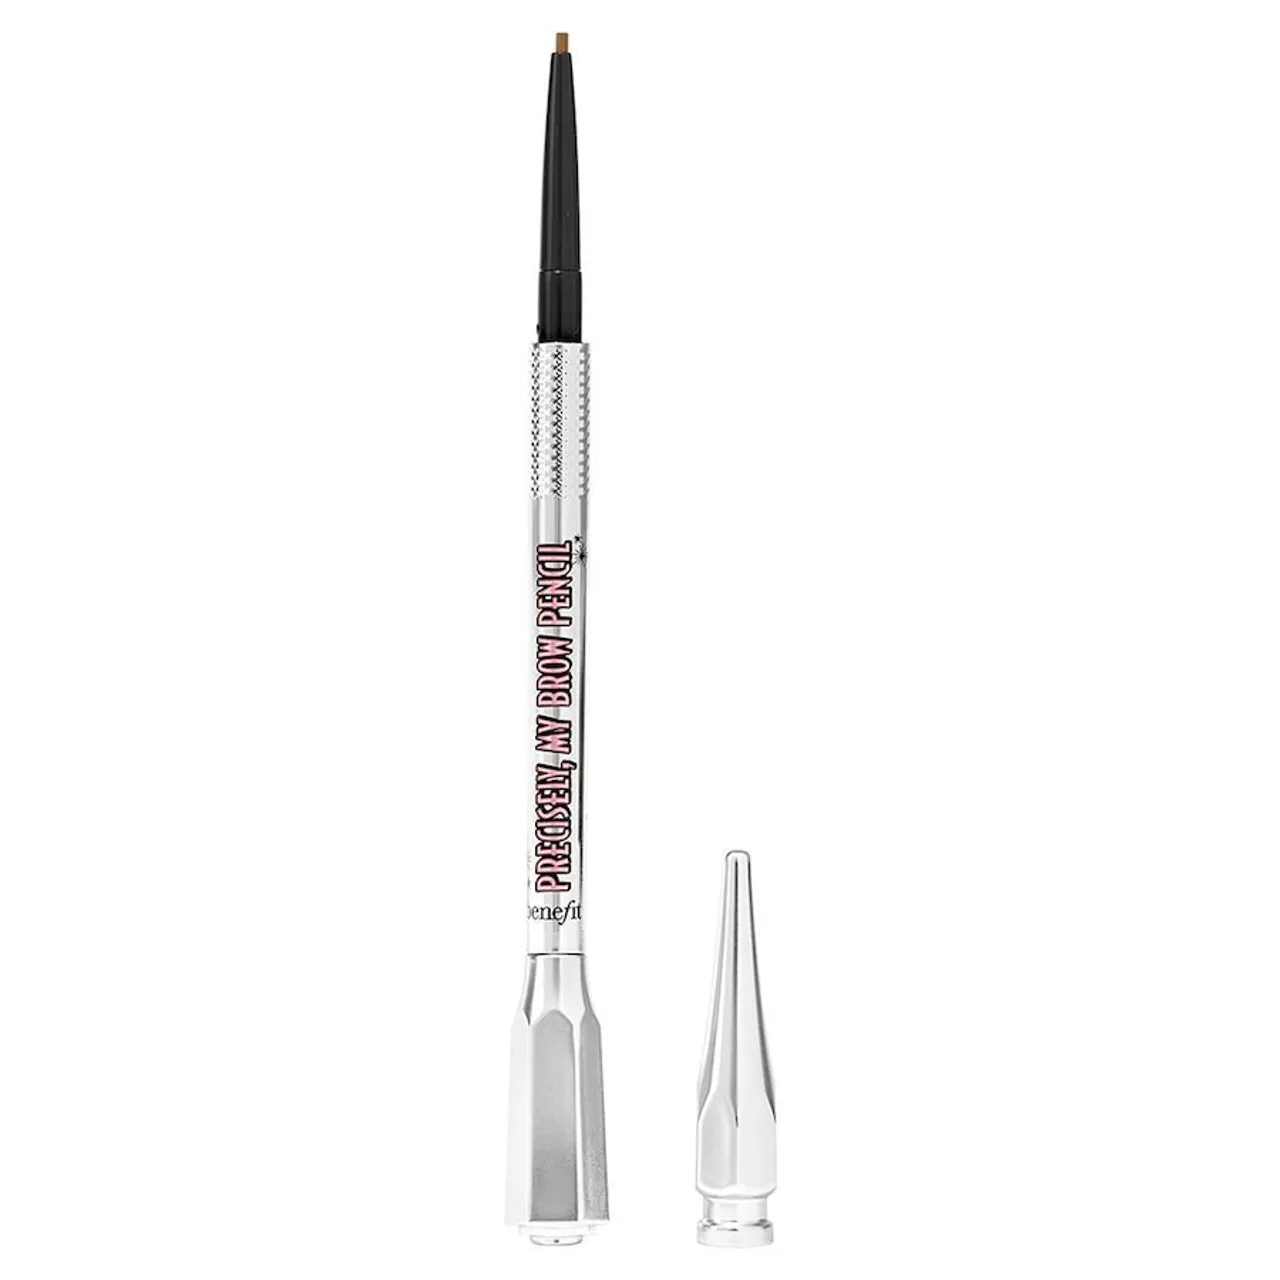 Benefit - Brow Collection Precisely, My Brow Pencil Augenbrauenstift 08 g 2.5 - NEUTRAL